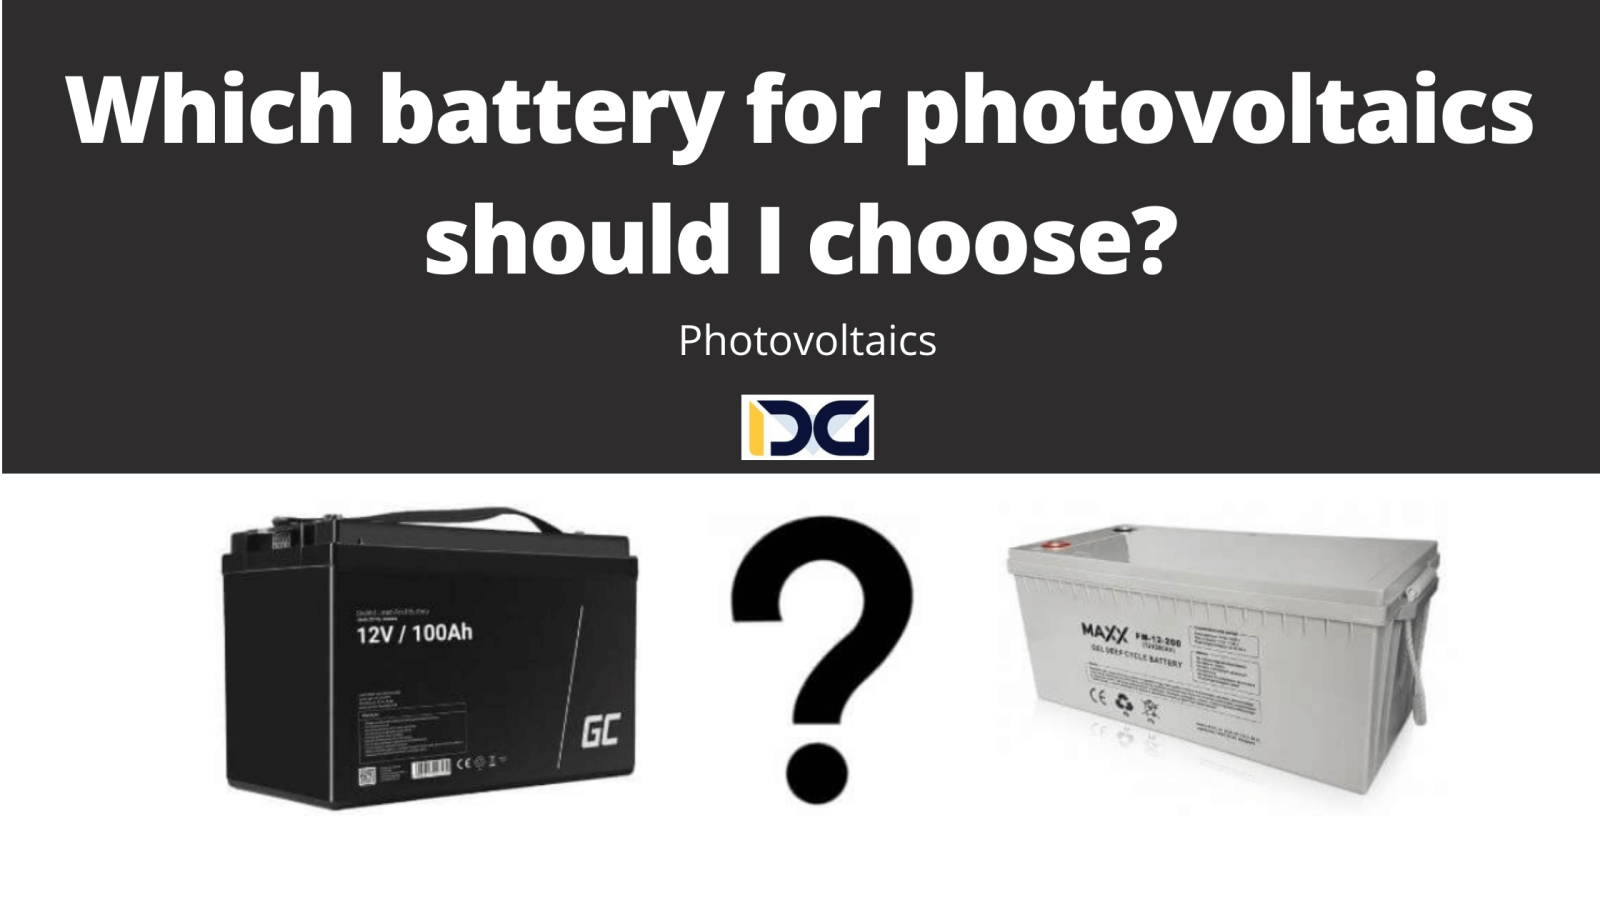 Which battery for photovoltaics should I choose